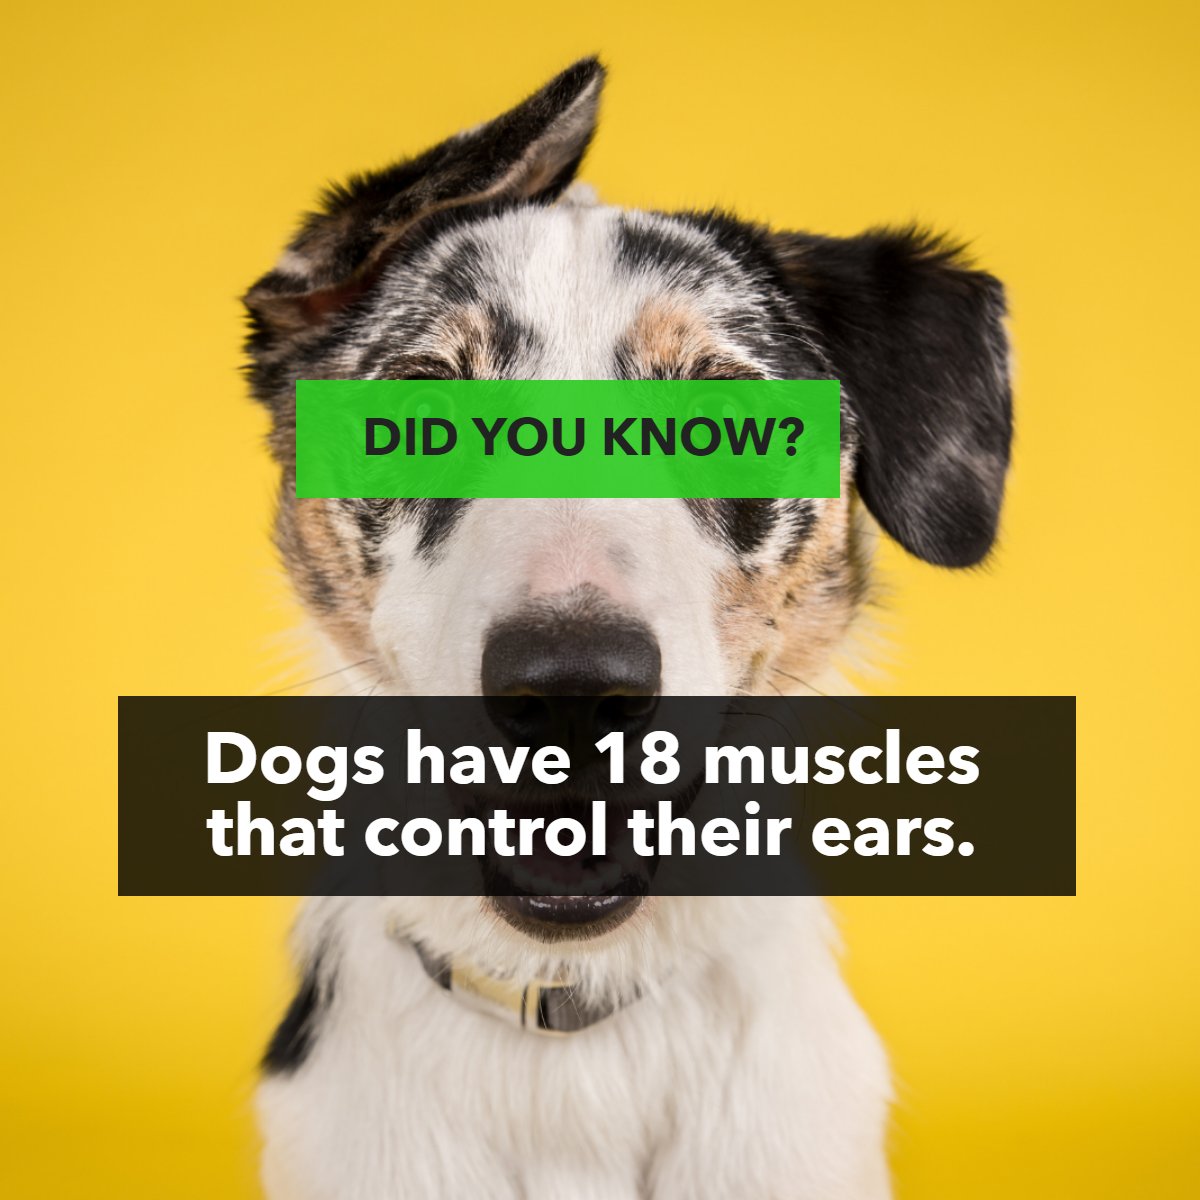 With all those muscles, is there an ear training day? 💪 😂

#funfacts      #dogfact      #dogfacts      #dogfactsoflife